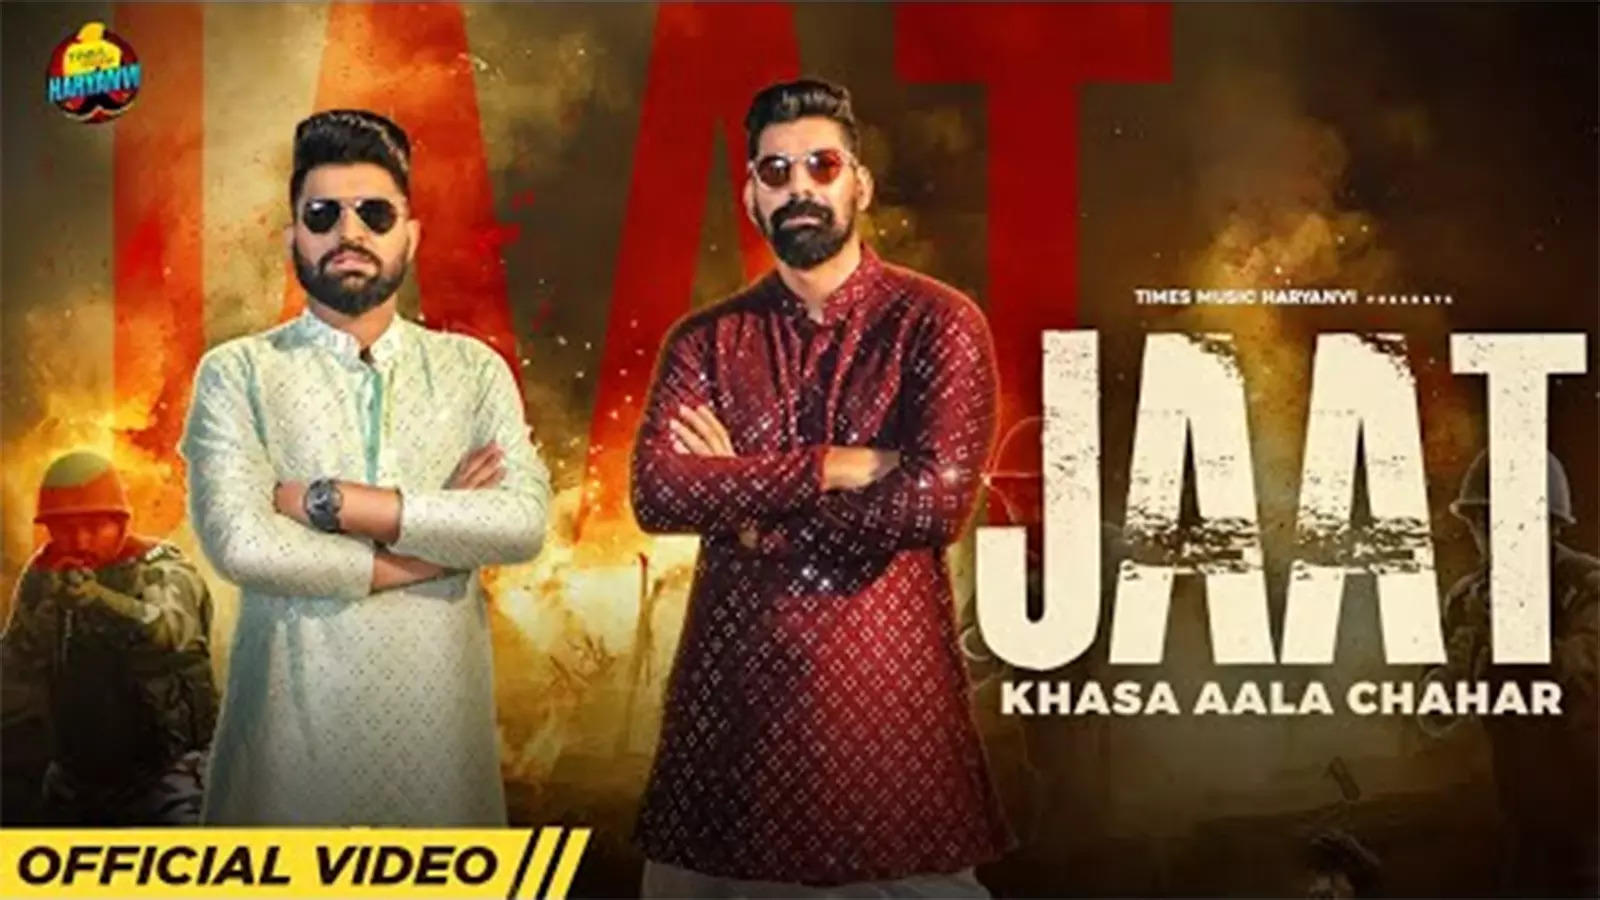 Check Out Latest Haryanvi Video Song 'Jaat' Sung By Khasa Aala Chahar |  Haryanvi Video Songs - Times of India